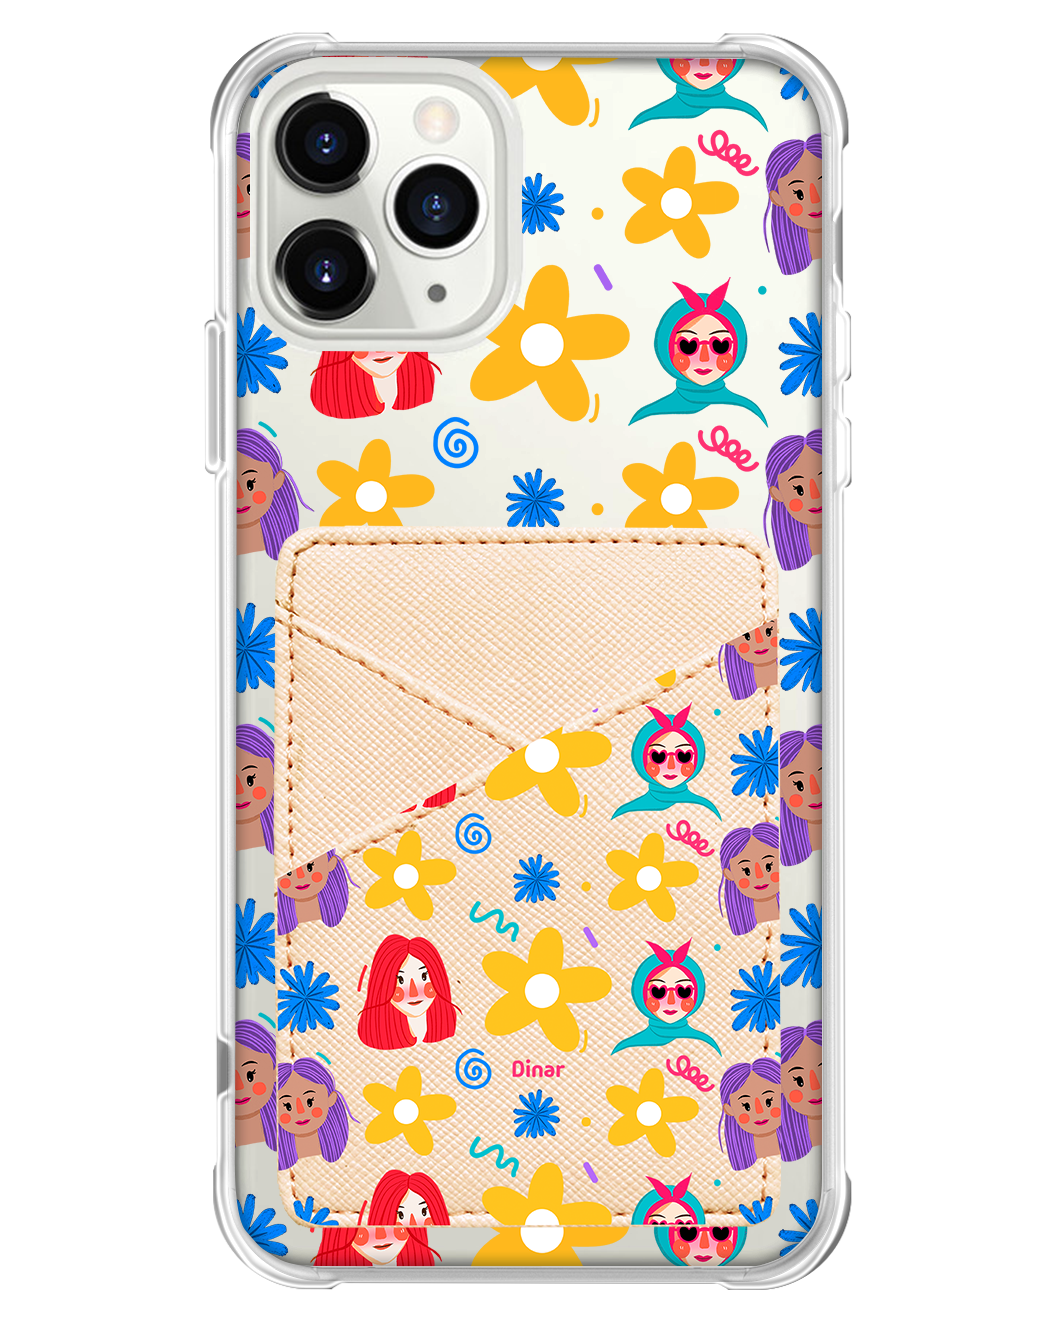 iPhone Phone Wallet Case - Daisy Faces